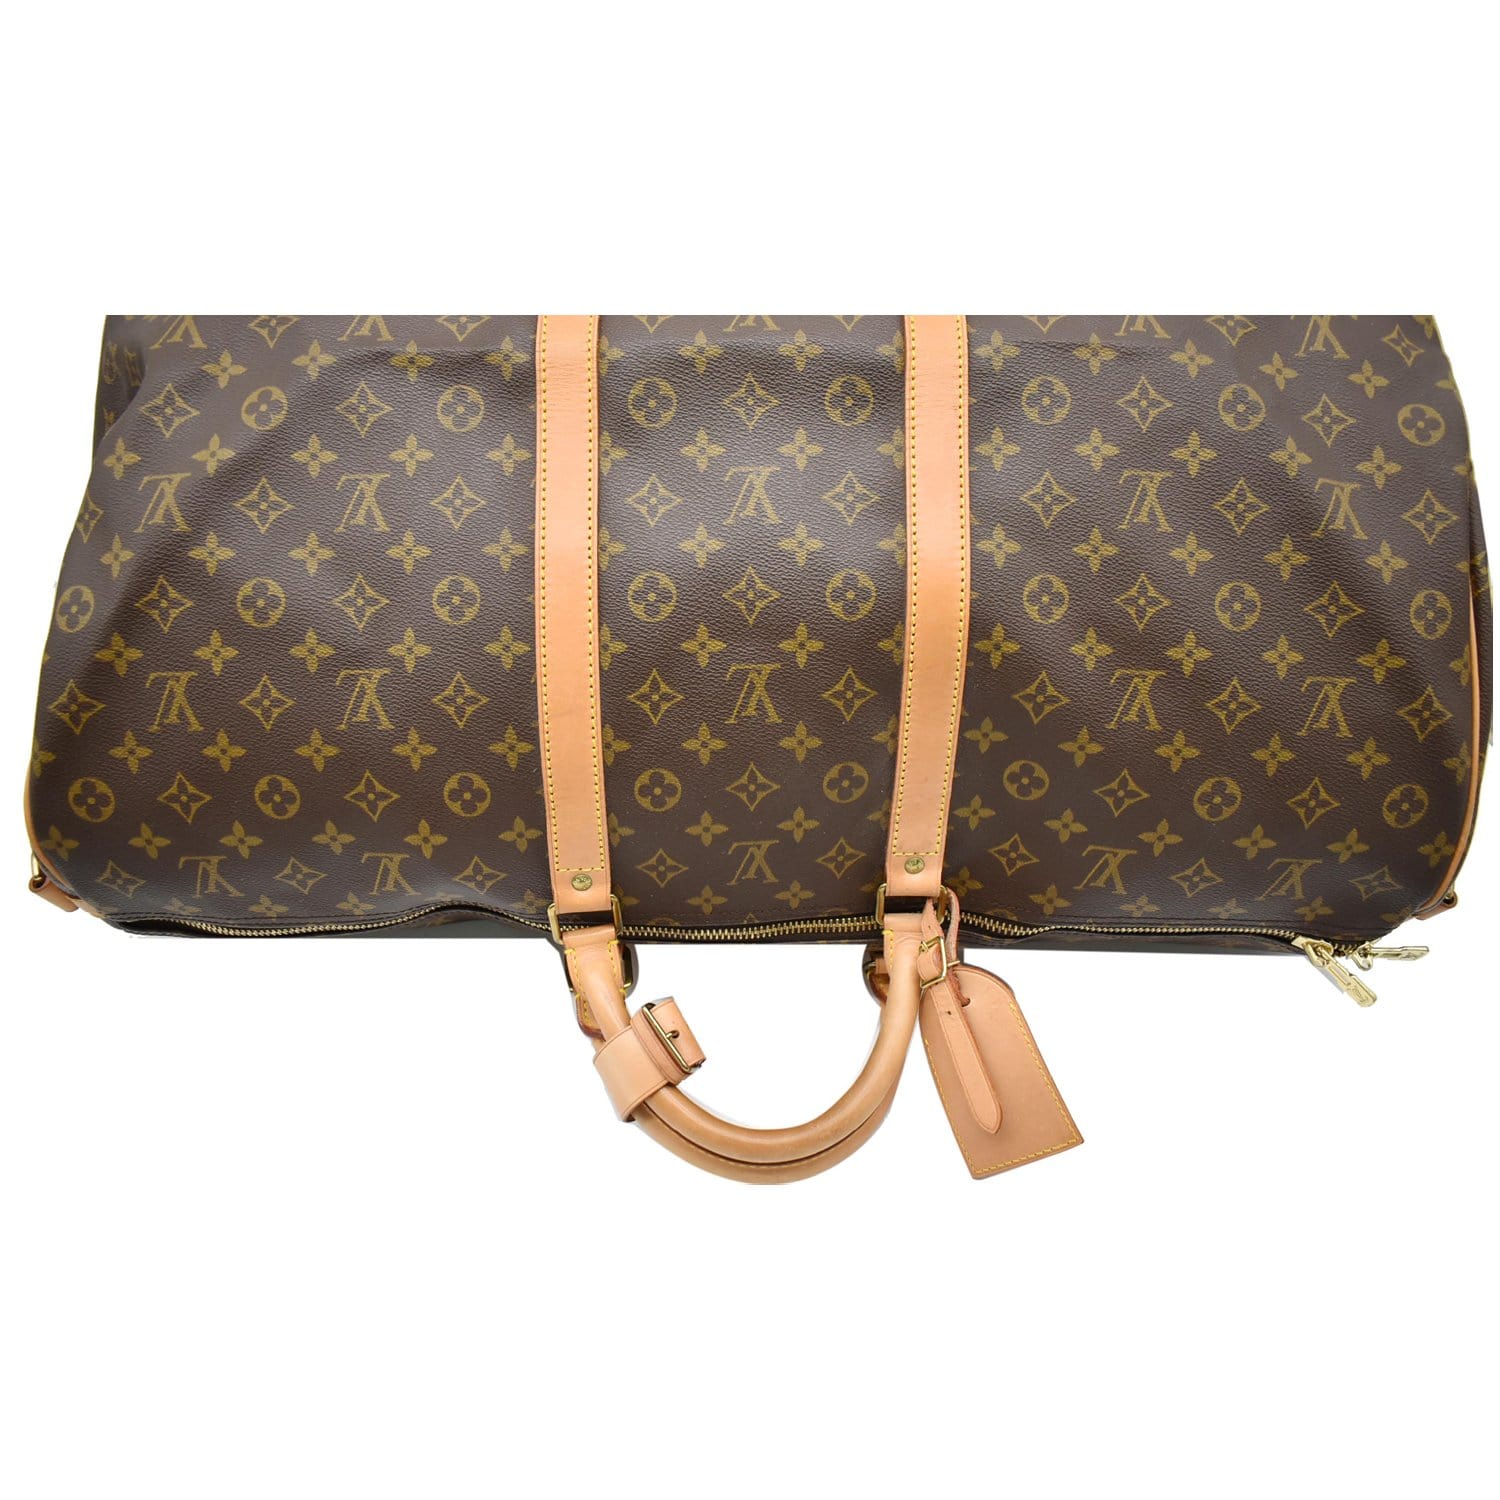 Louis Vuitton Keepall Bandouliere 40 Leather Duffle Bag on SALE